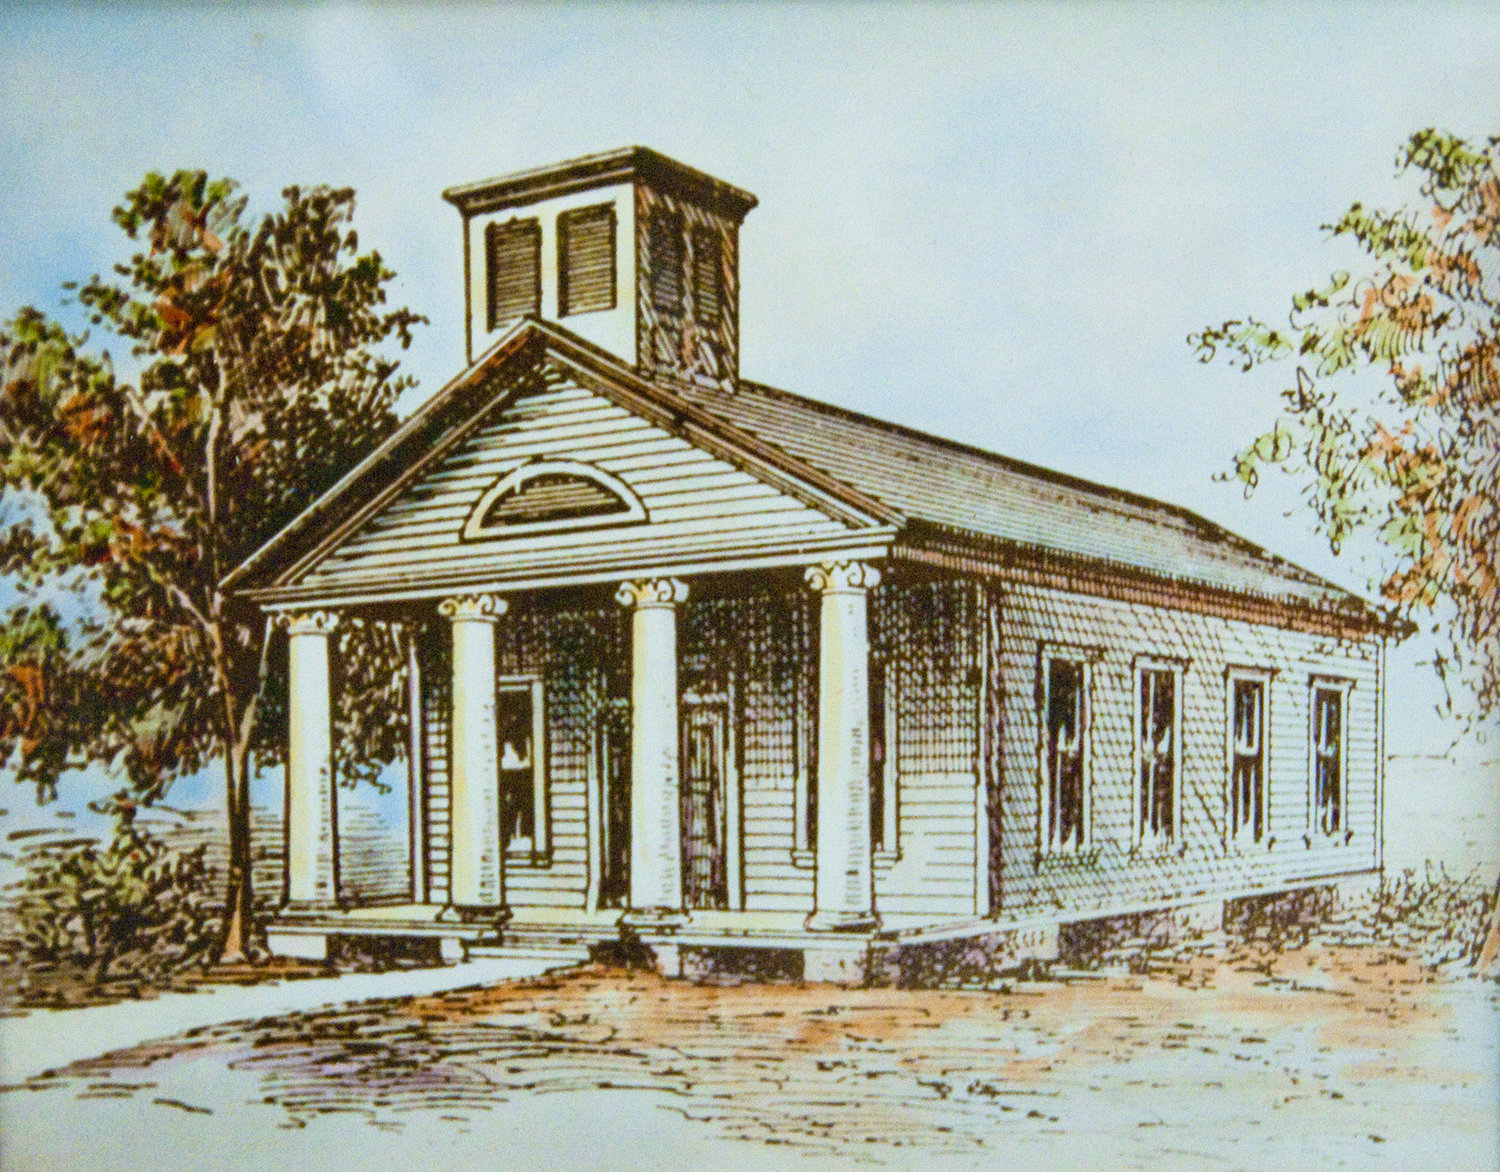 The first meeting house of First Baptist Church Atlanta in 1848 was constructed with funds provided by the Georgia Baptist Convention. (Photo/FBC Atlanta)